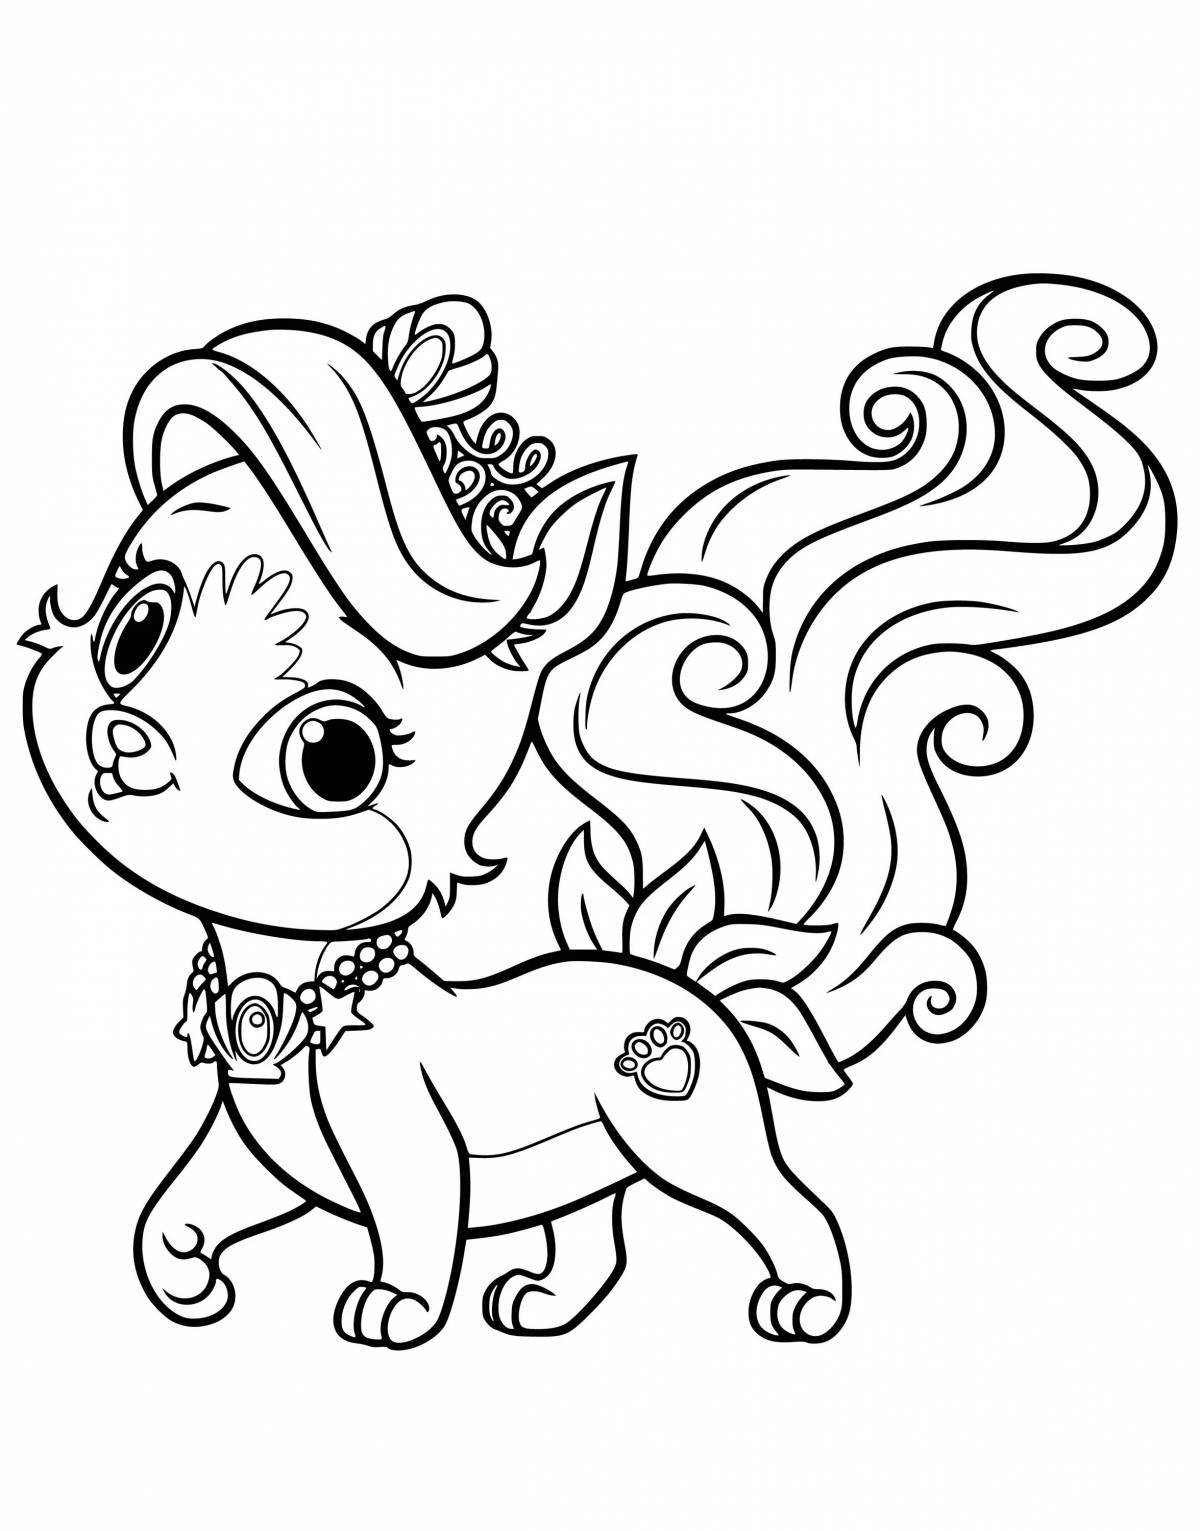 Great queen of cats coloring page